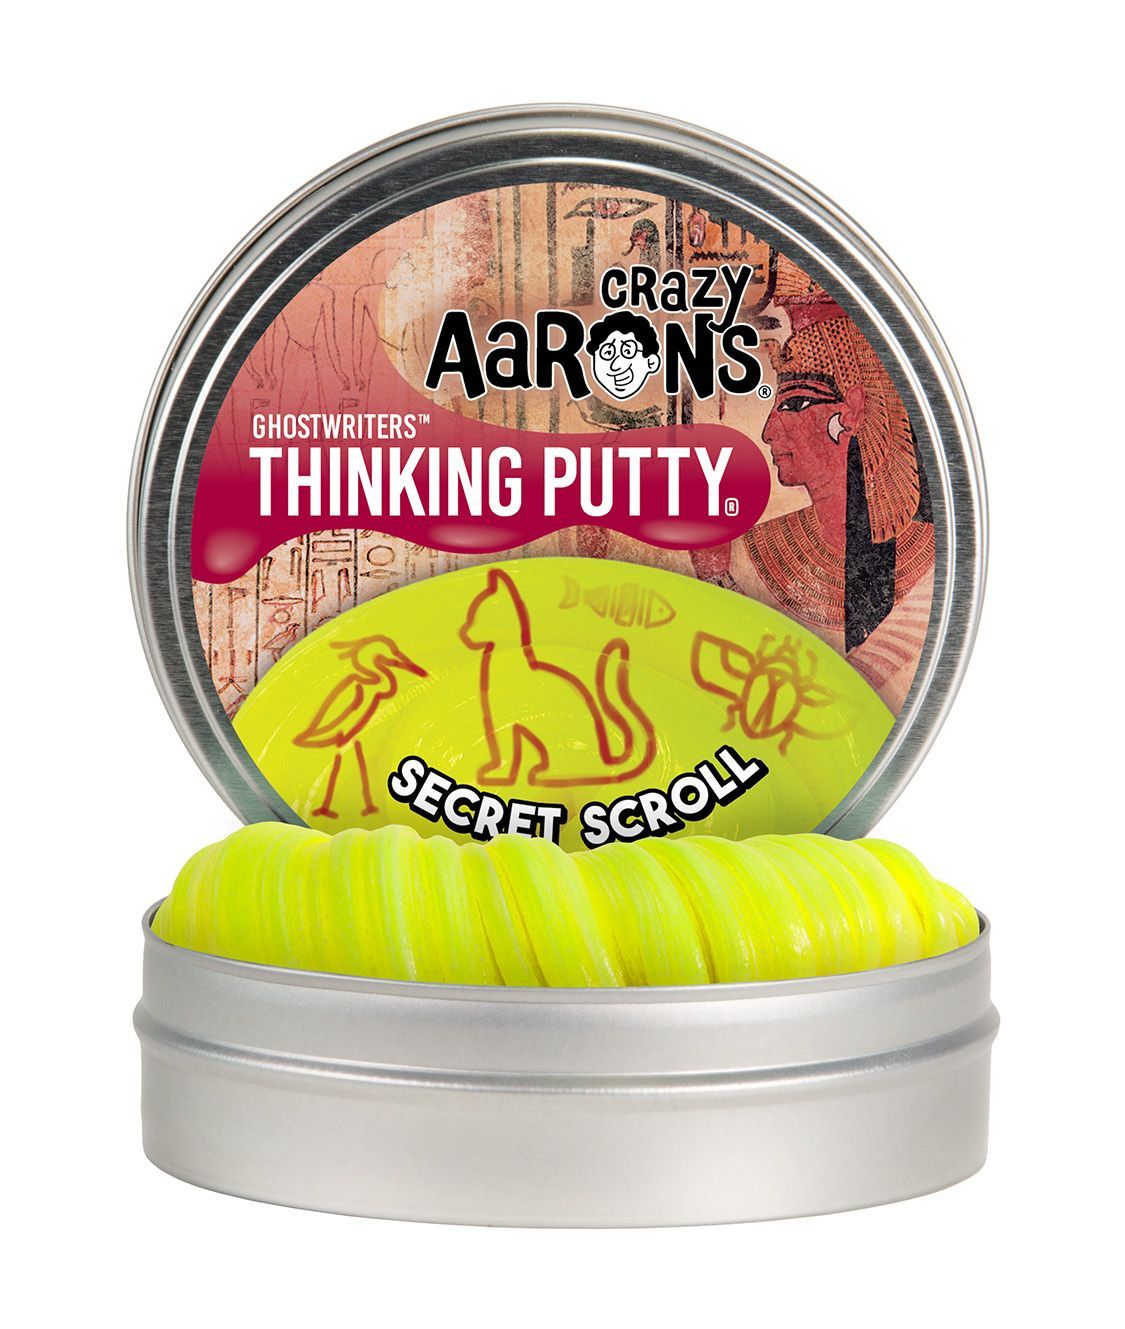 Crazy Aaron's Thinking Putty - Ghostwriters